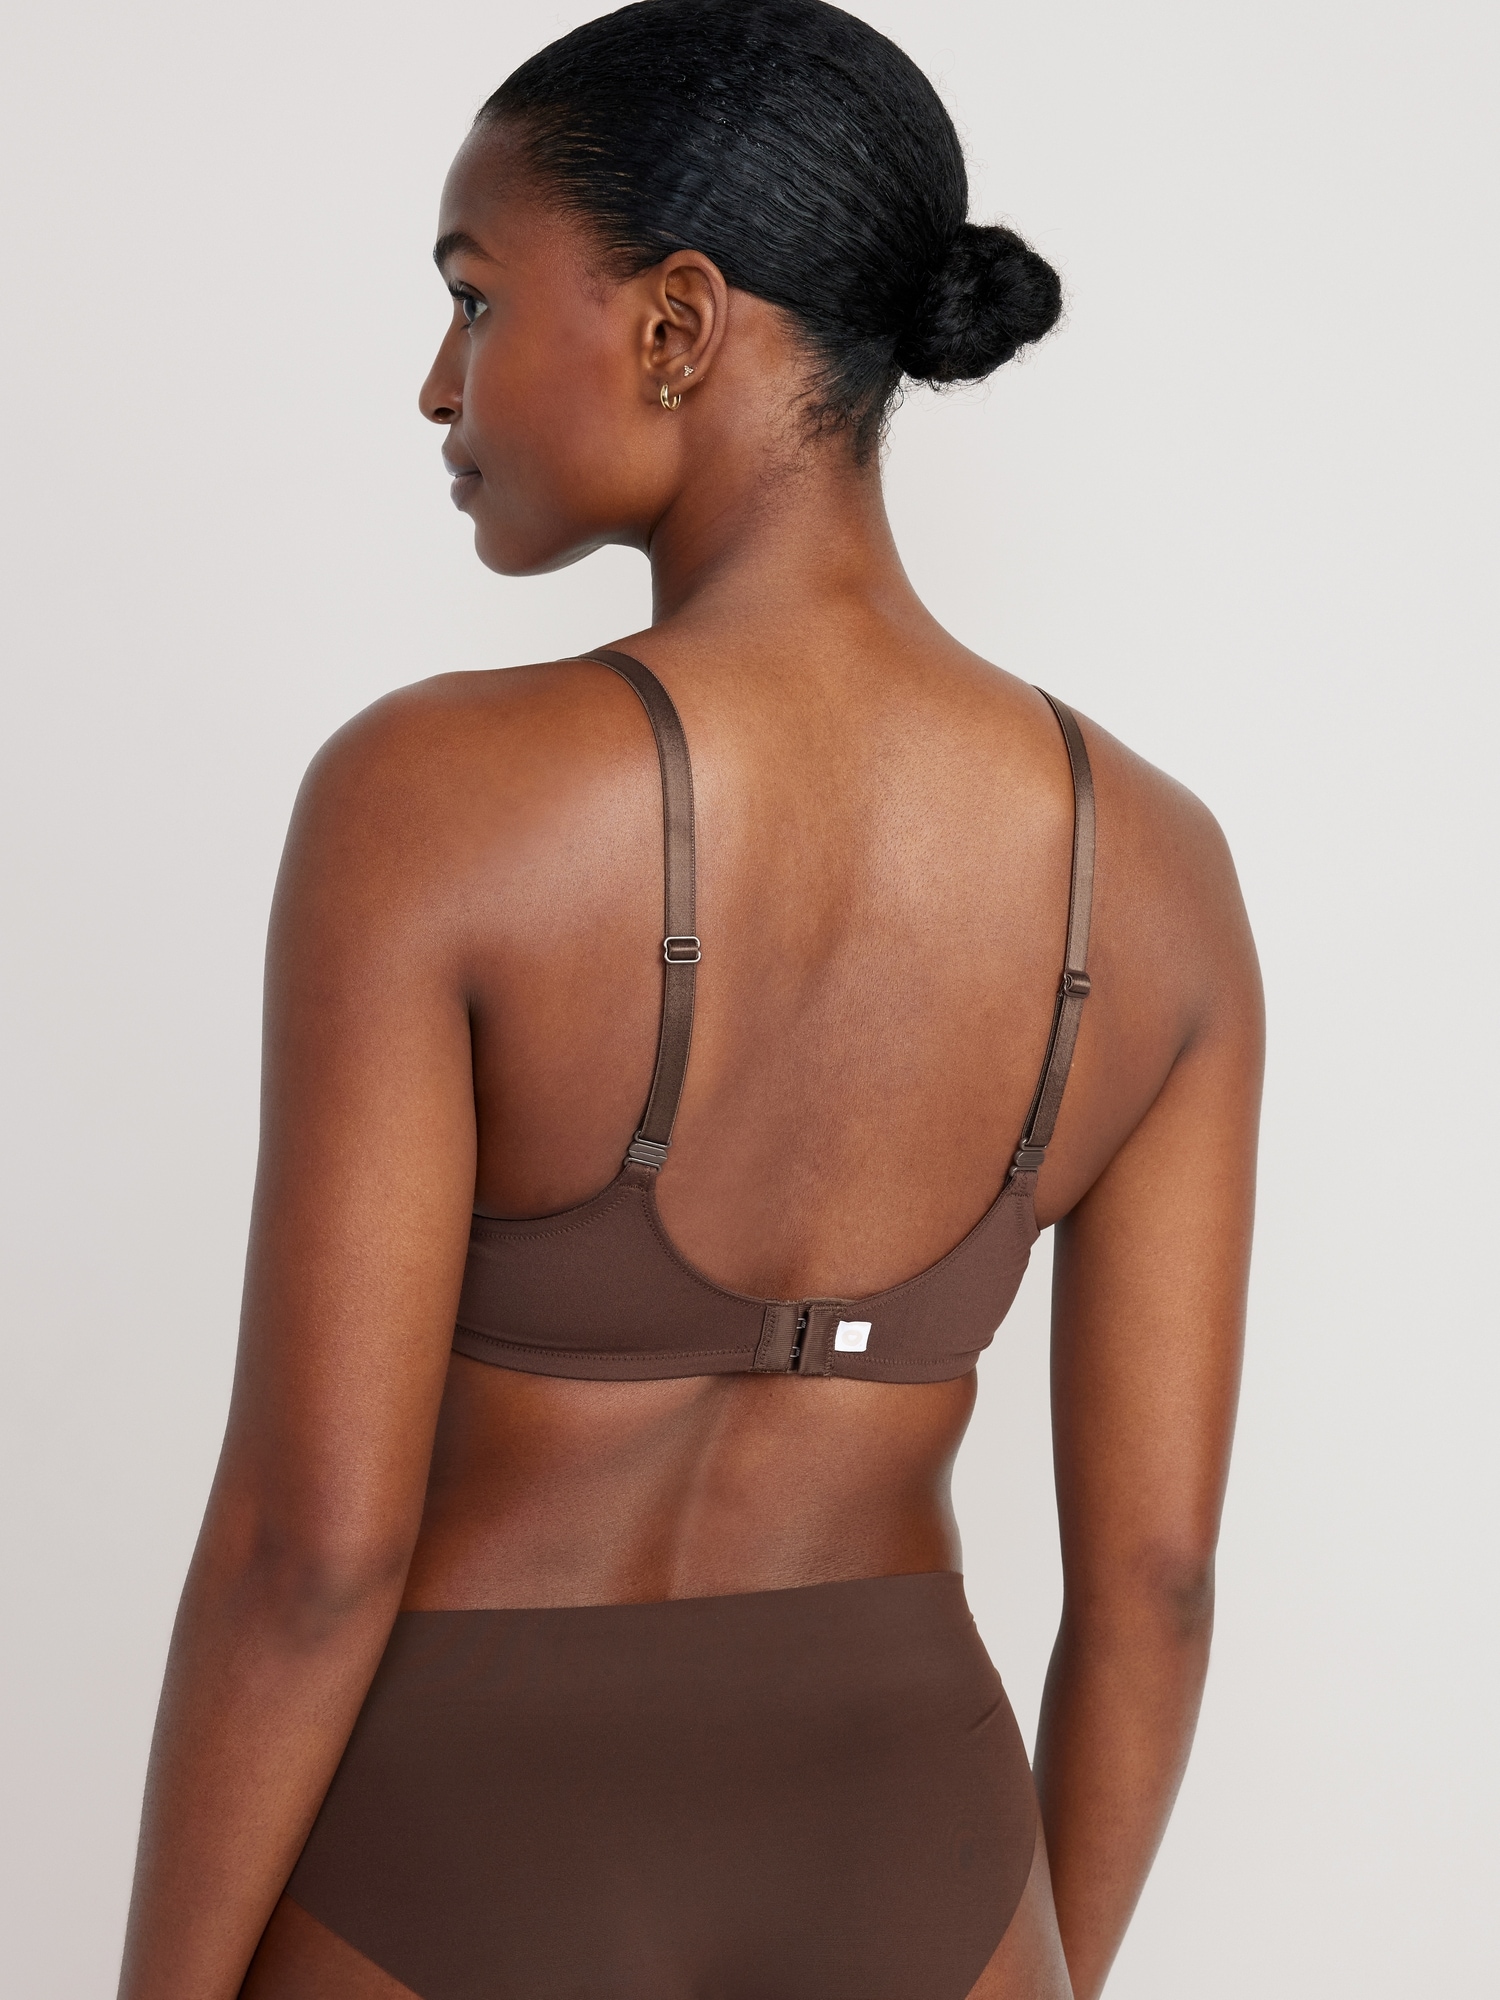 This is the game-changing non wired bra for women size D+ - OK! Magazine